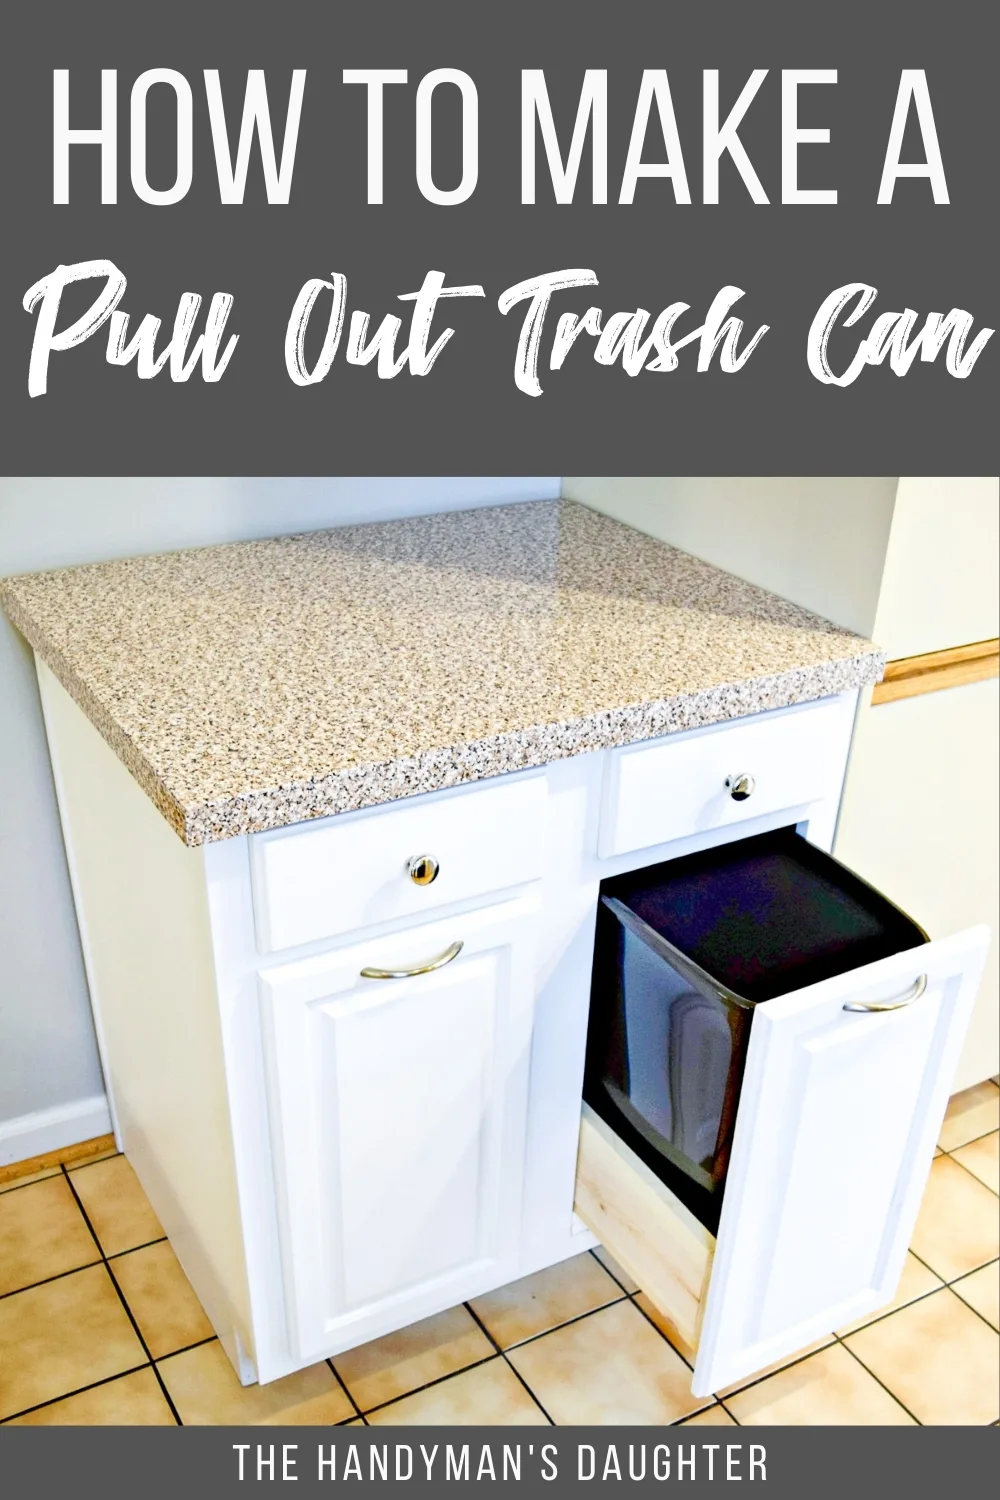 https://www.thehandymansdaughter.com/wp-content/uploads/2021/05/How-to-Make-a-Pull-Out-Trash-Can-Pin-1.jpg.webp